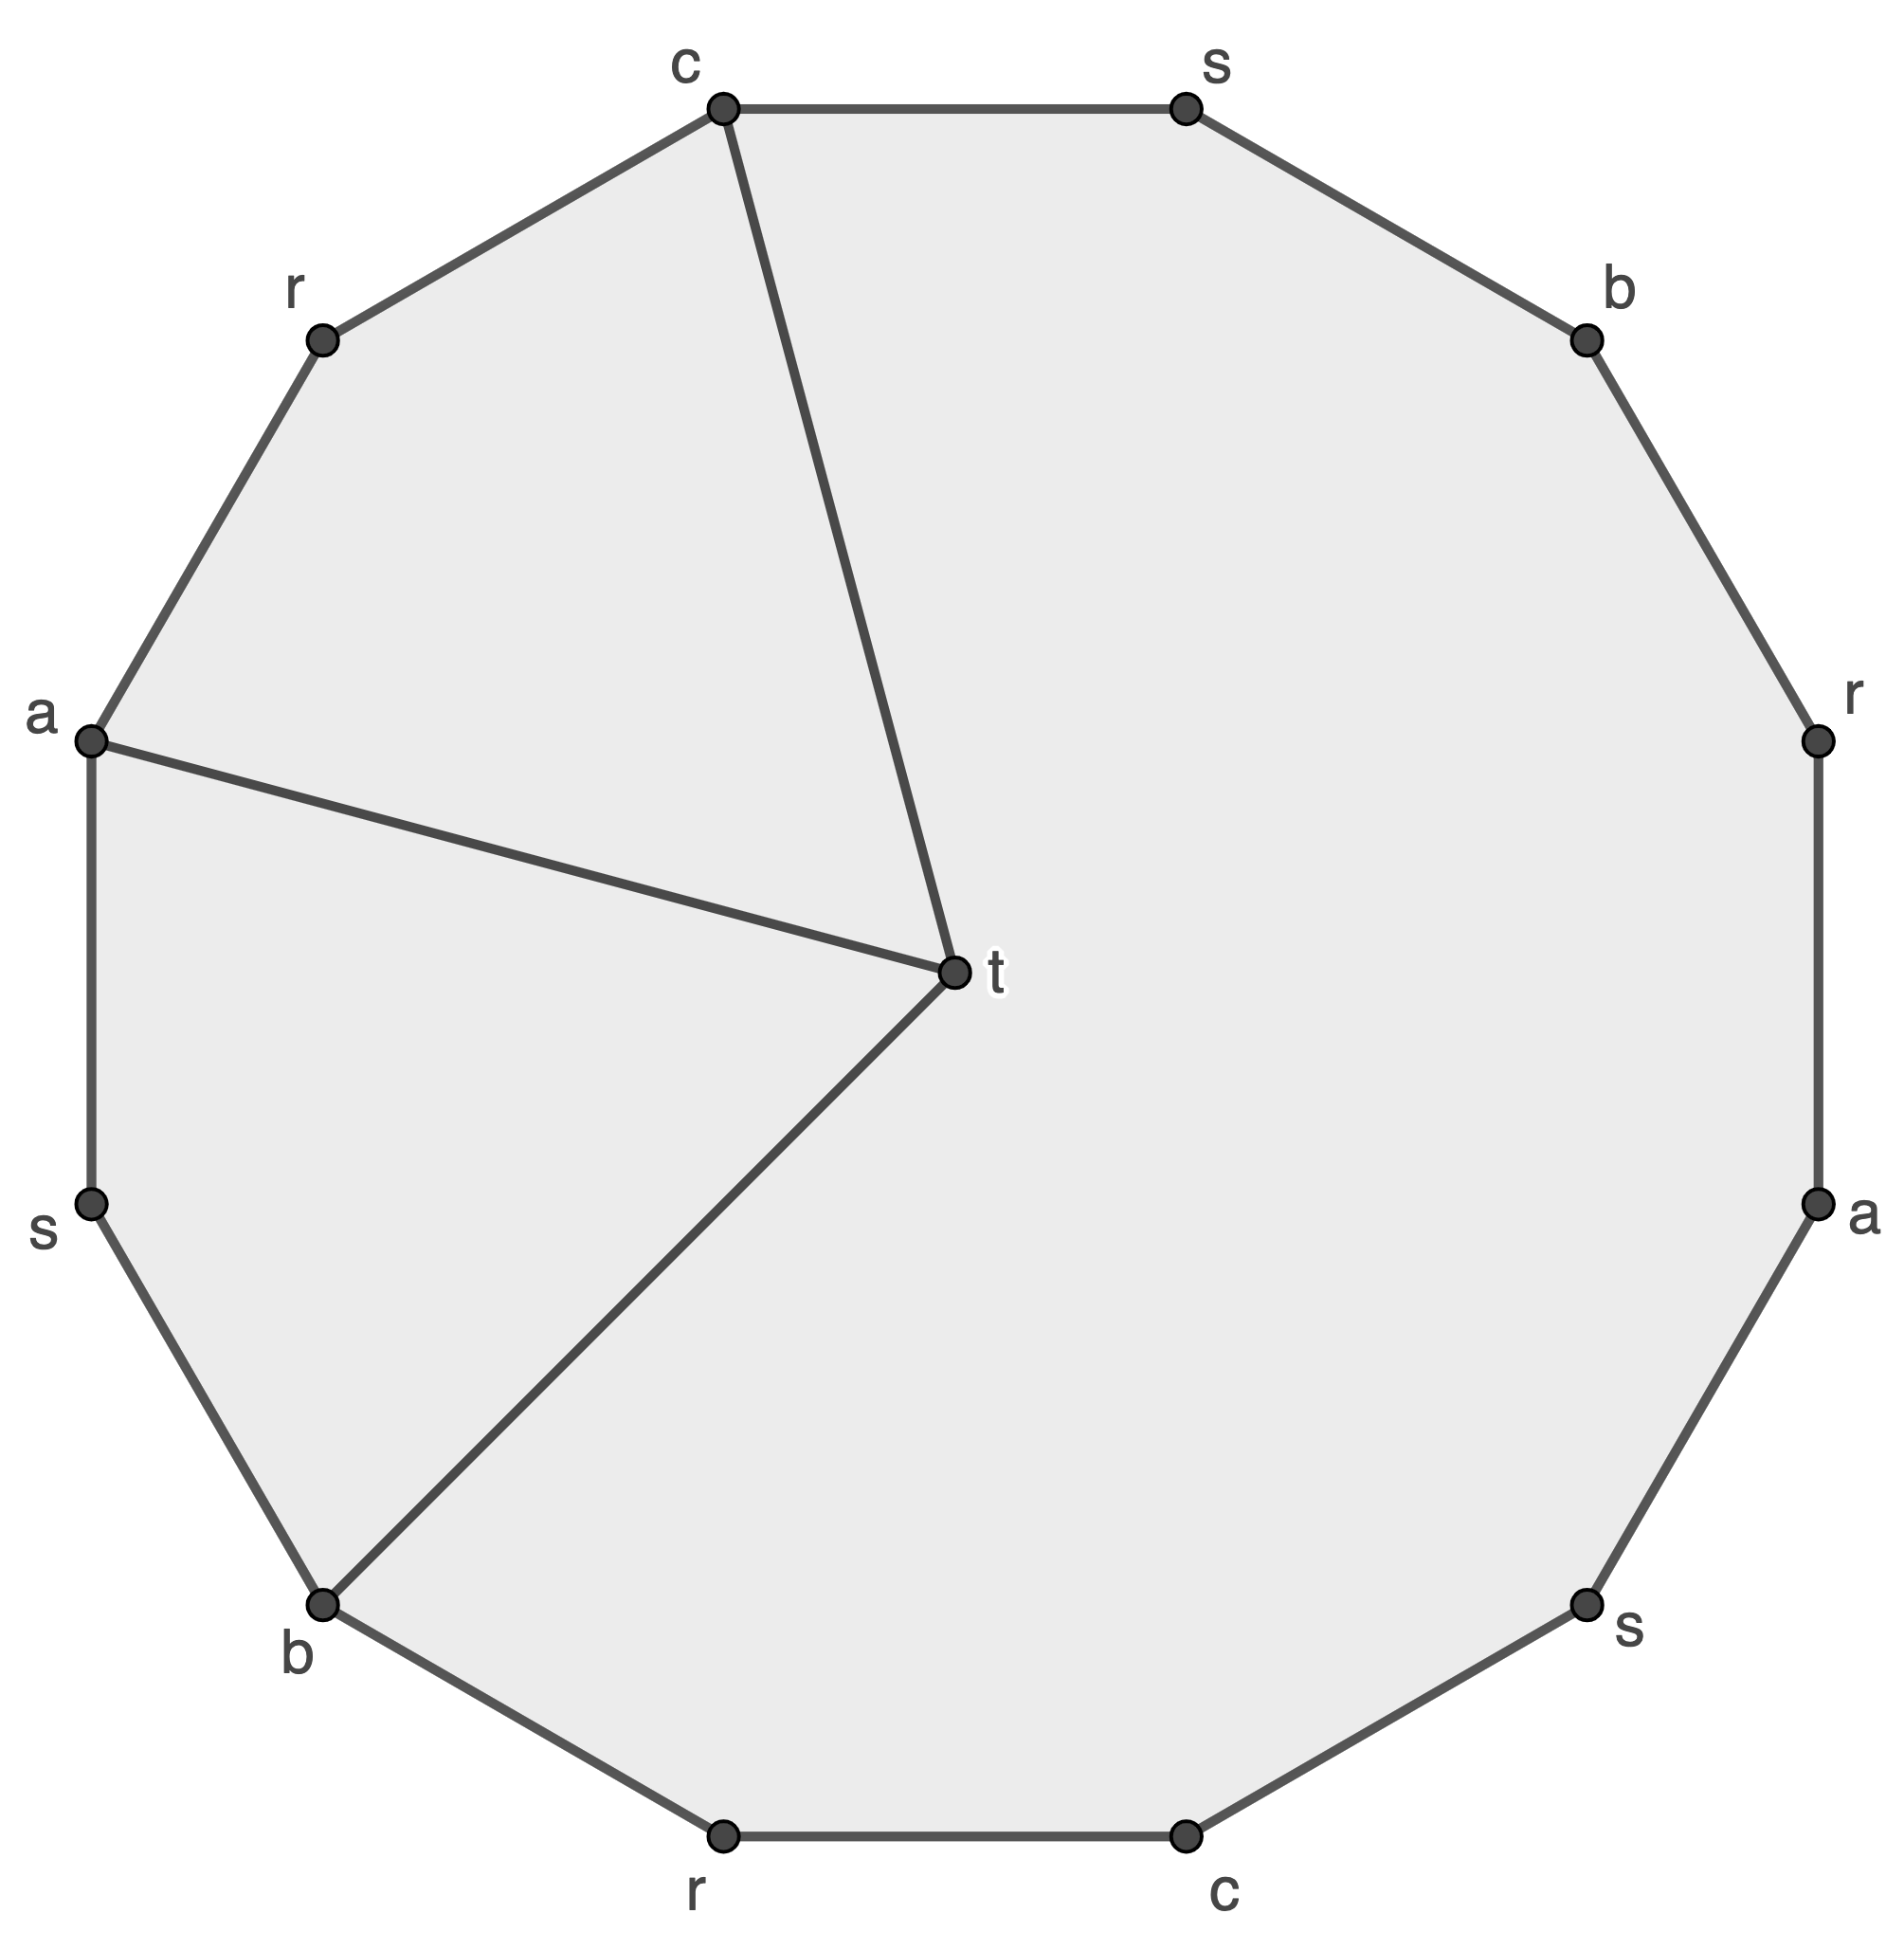 An embedding of the bipartite graph K33 into the torus.